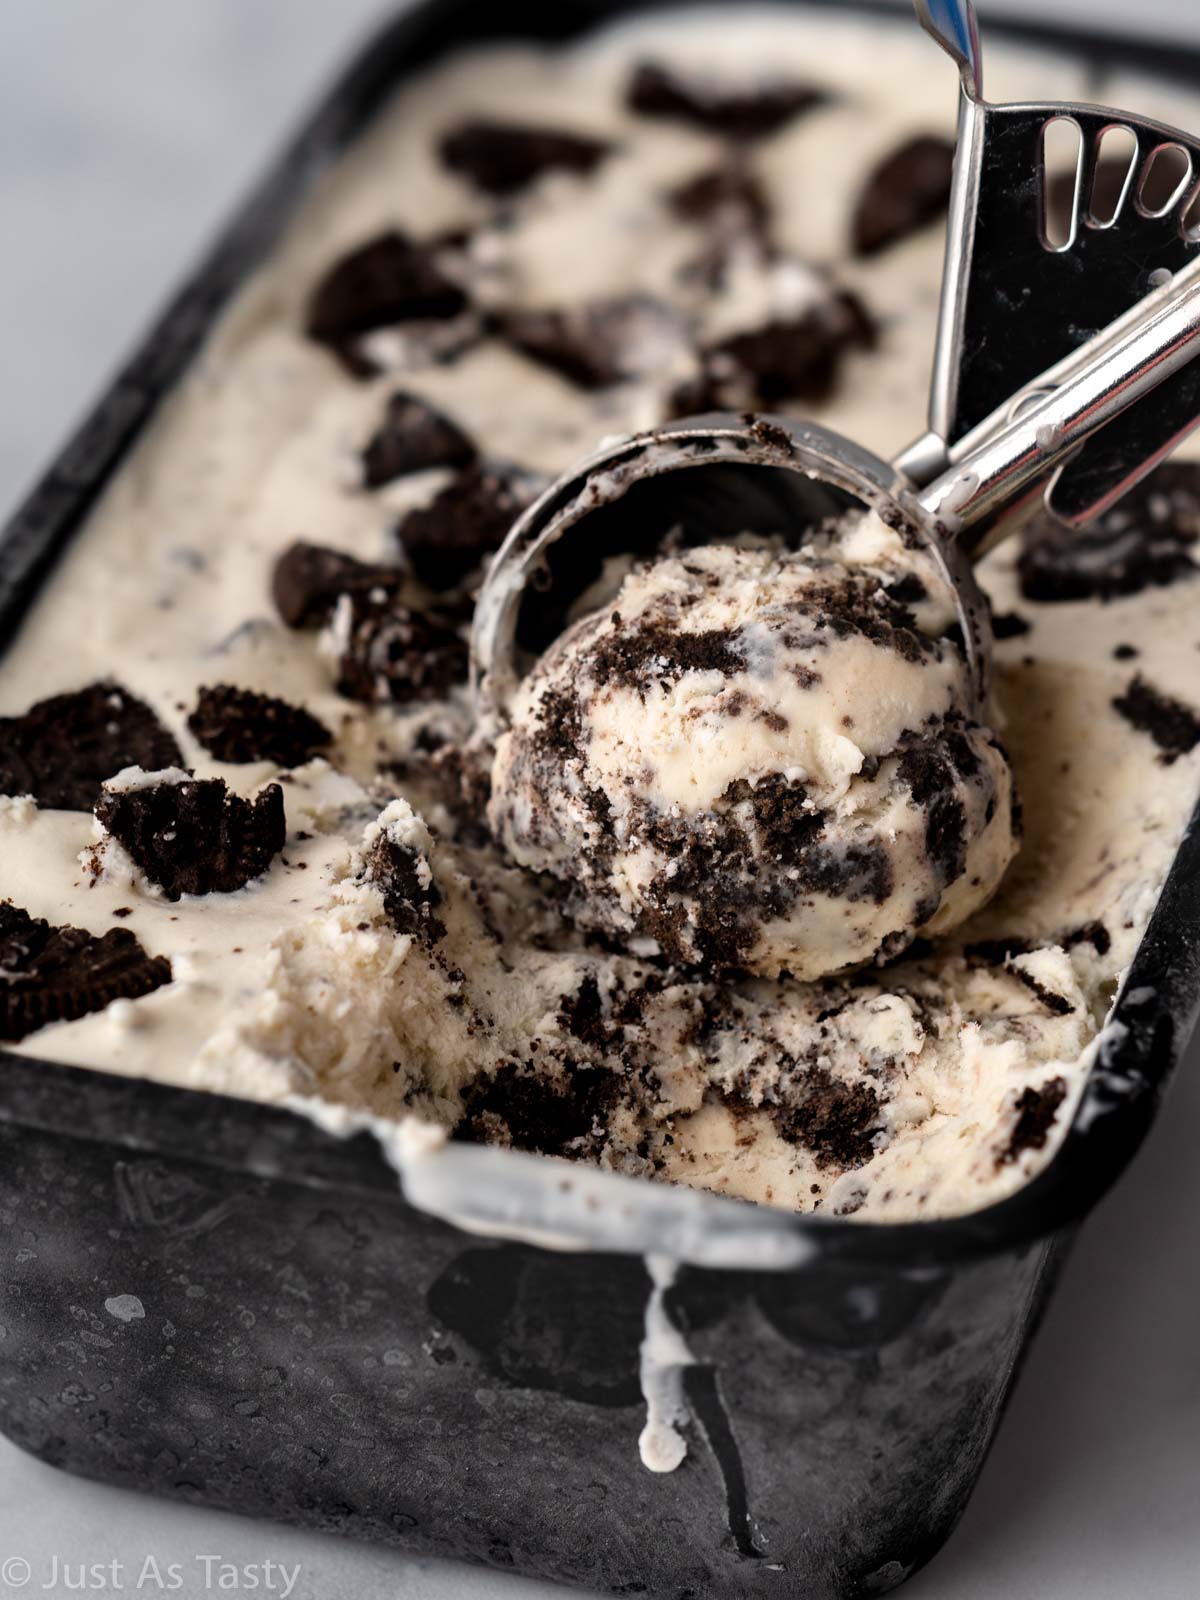 Close-up of Oreo ice cream being scooped out of container.